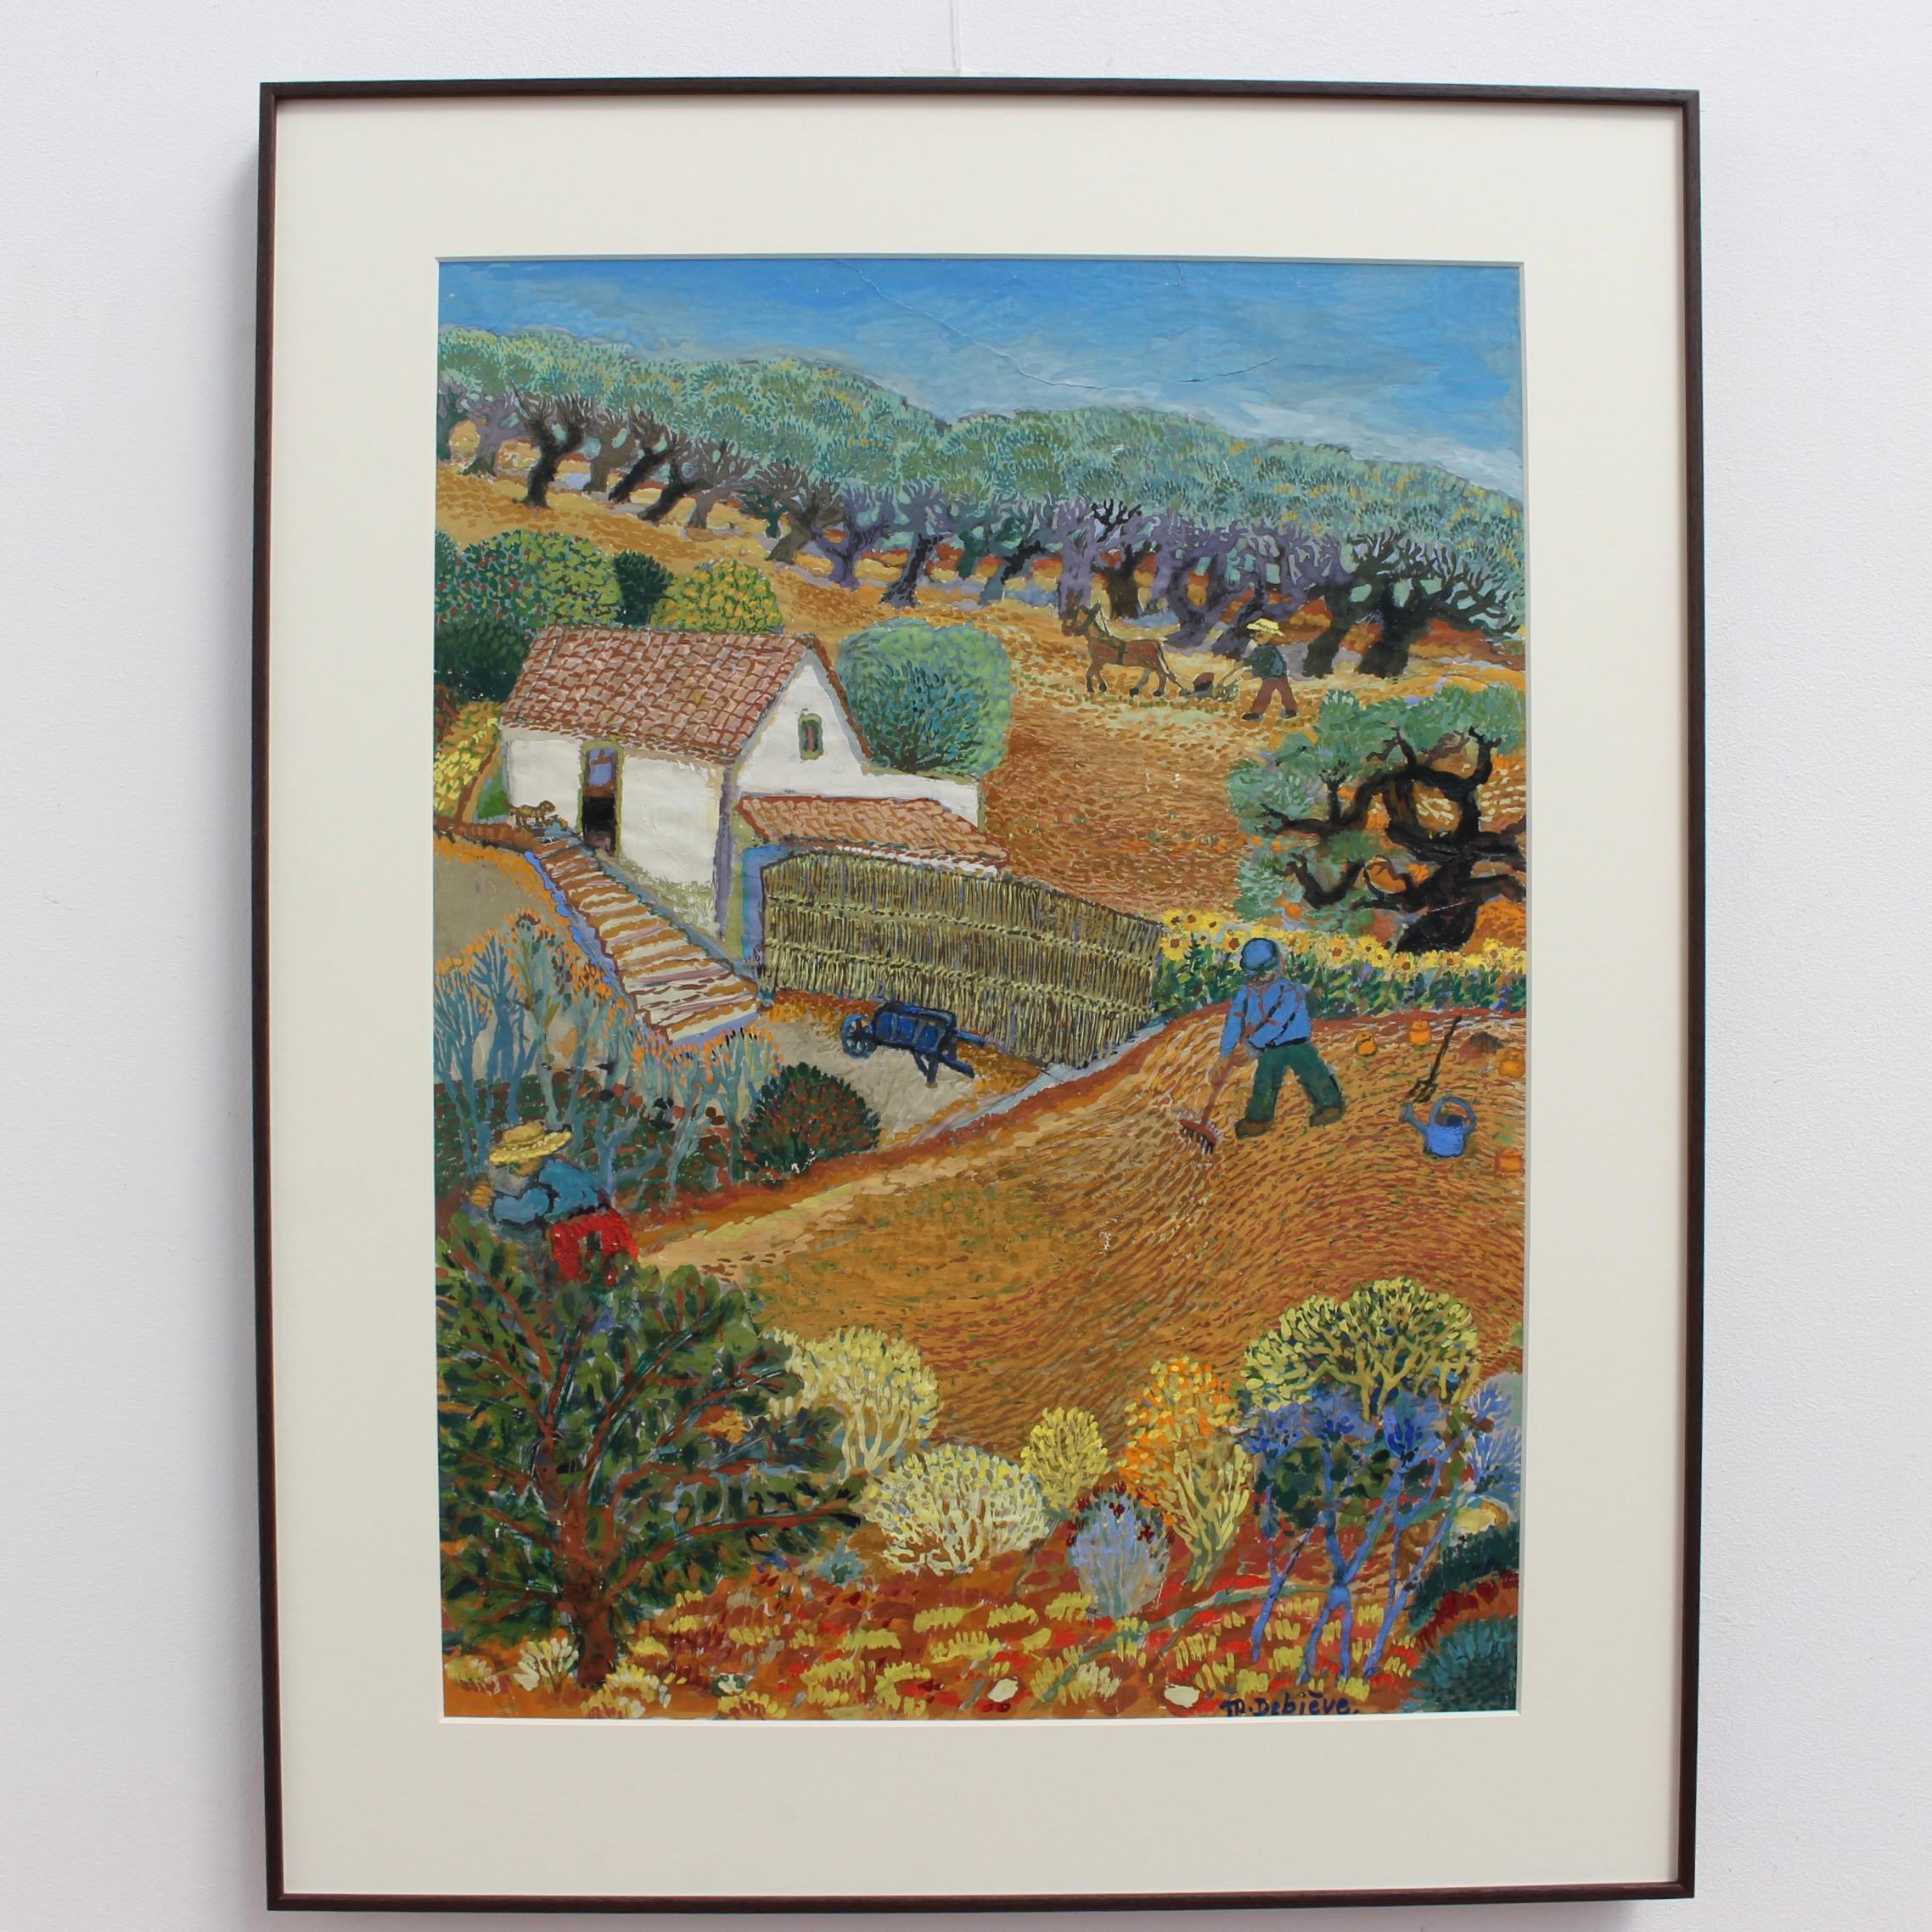 Family Farm in France - Painting by Michel Debiève